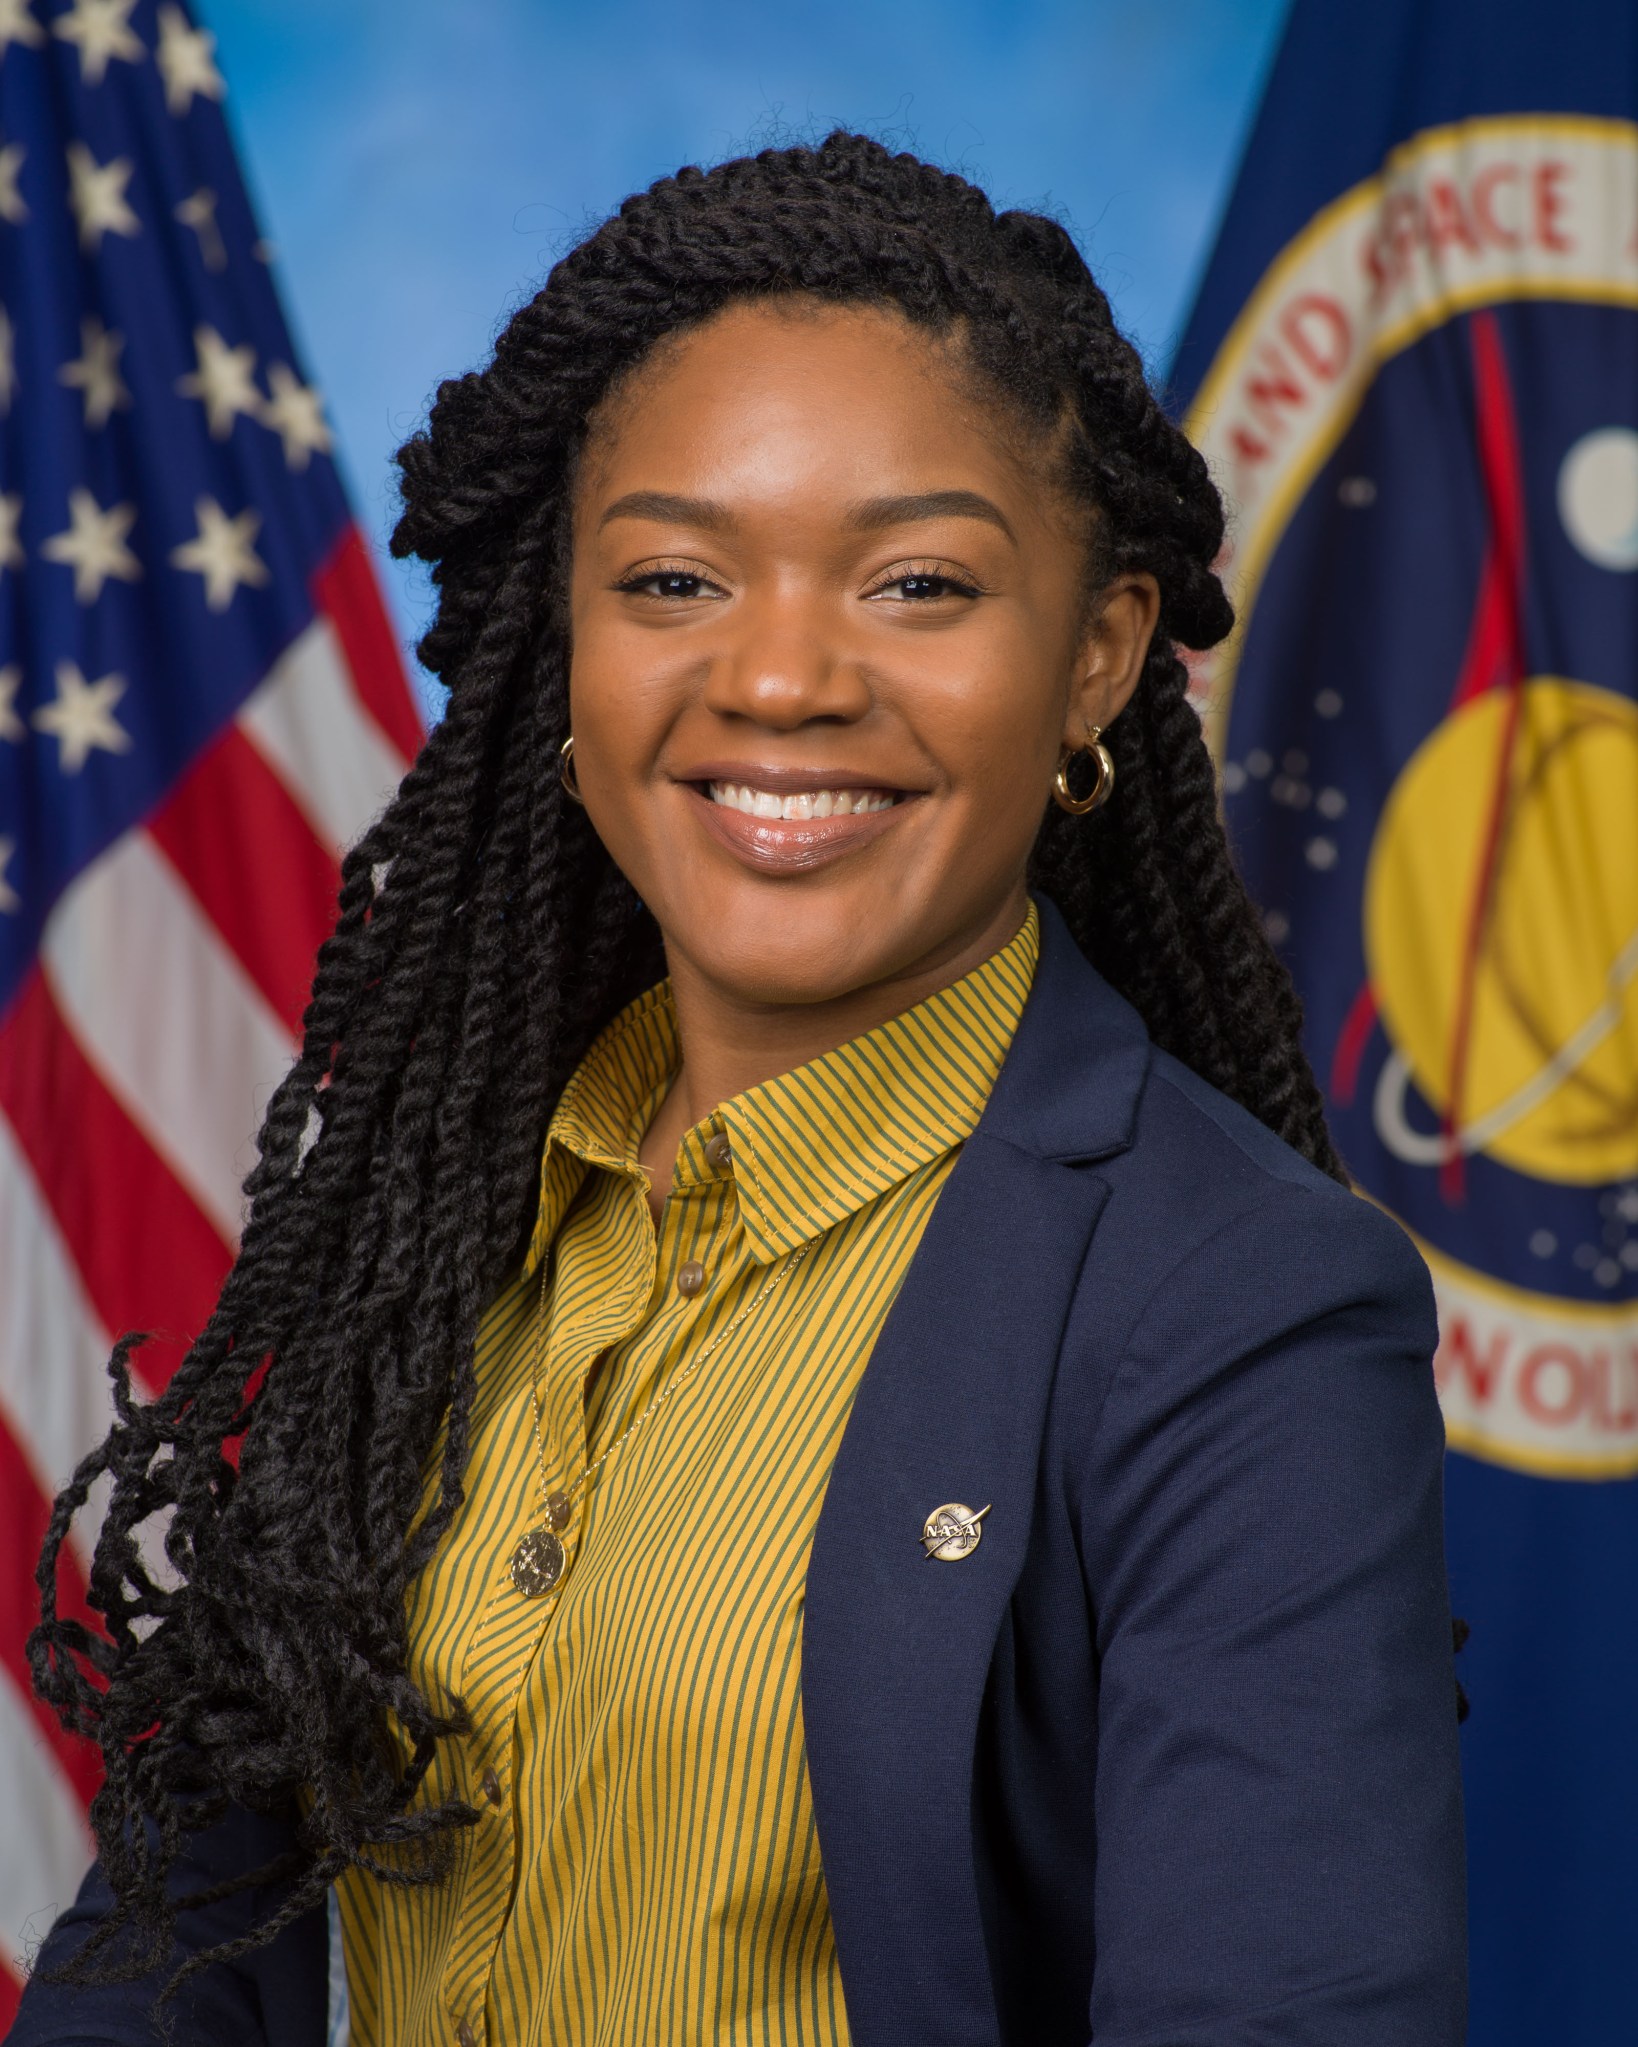 A woman wearing a yellow blouse and black blazer smiles in front of a blue background with two flags behind her, a U.S. flag on the left and a NASA flag on the right.